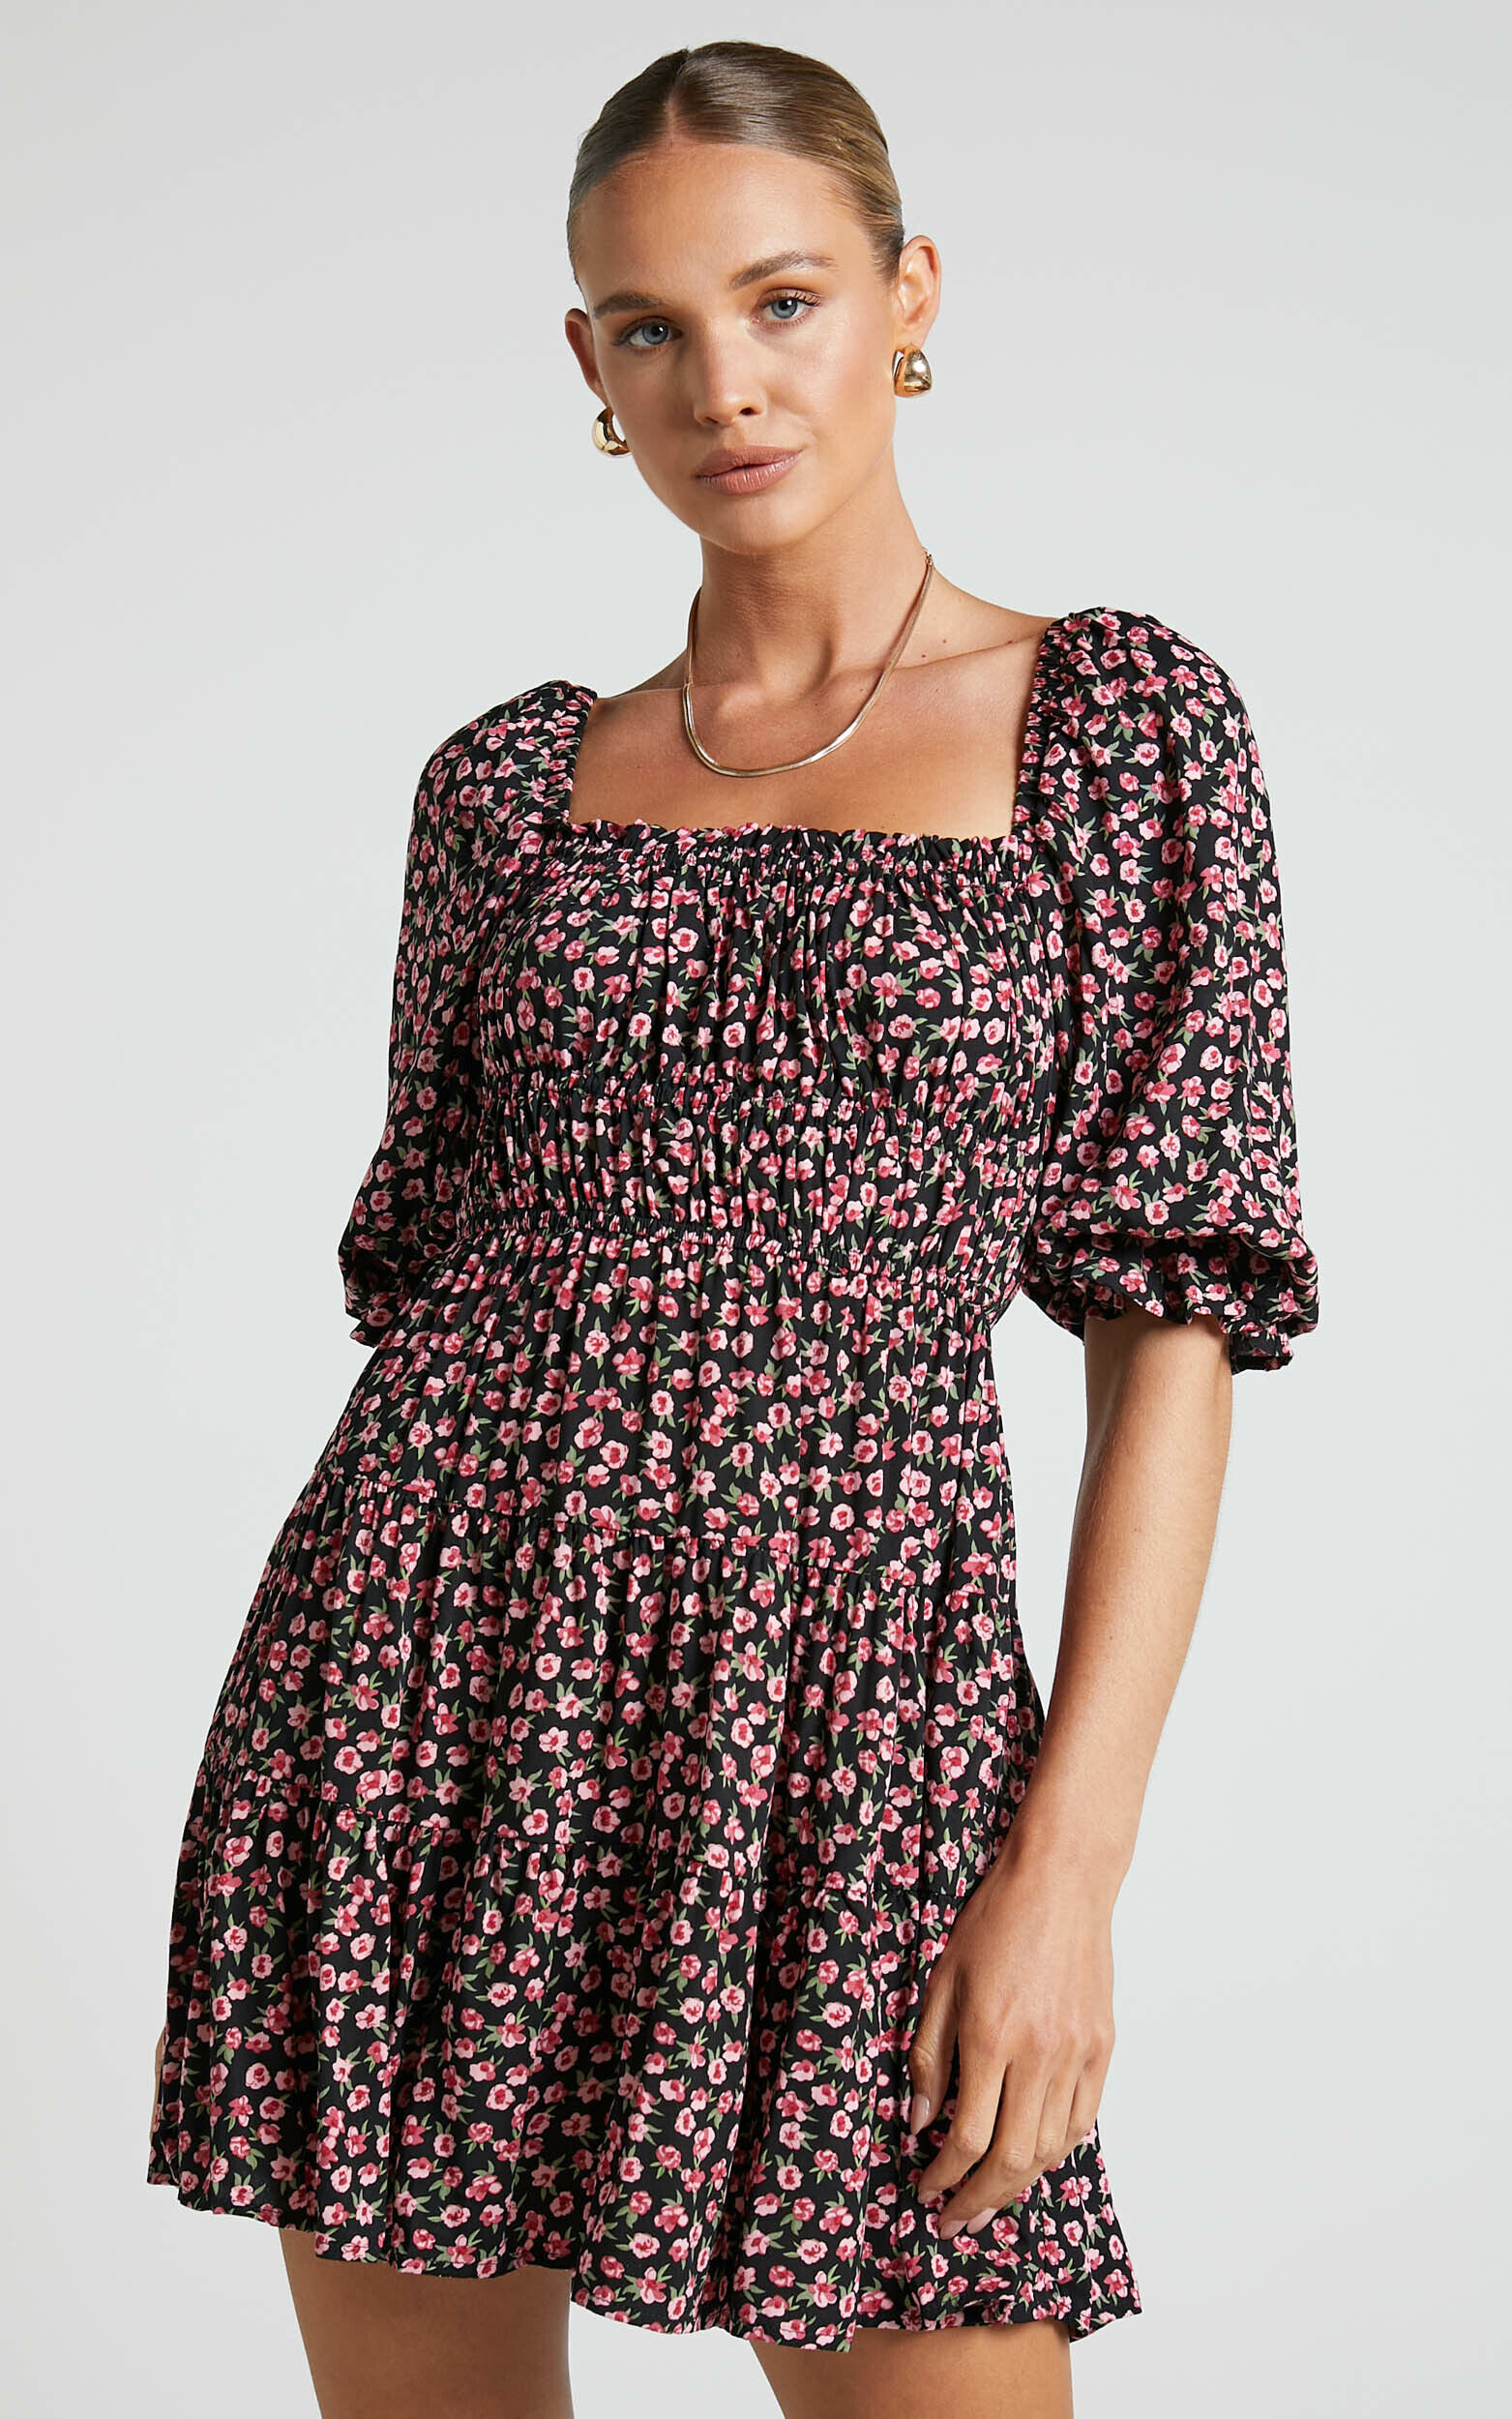 Zaley Mini Dress - Ruched Bodice 3/4 Puff Sleeve Dress in Black Floral - 04, BLK1, super-hi-res image number null